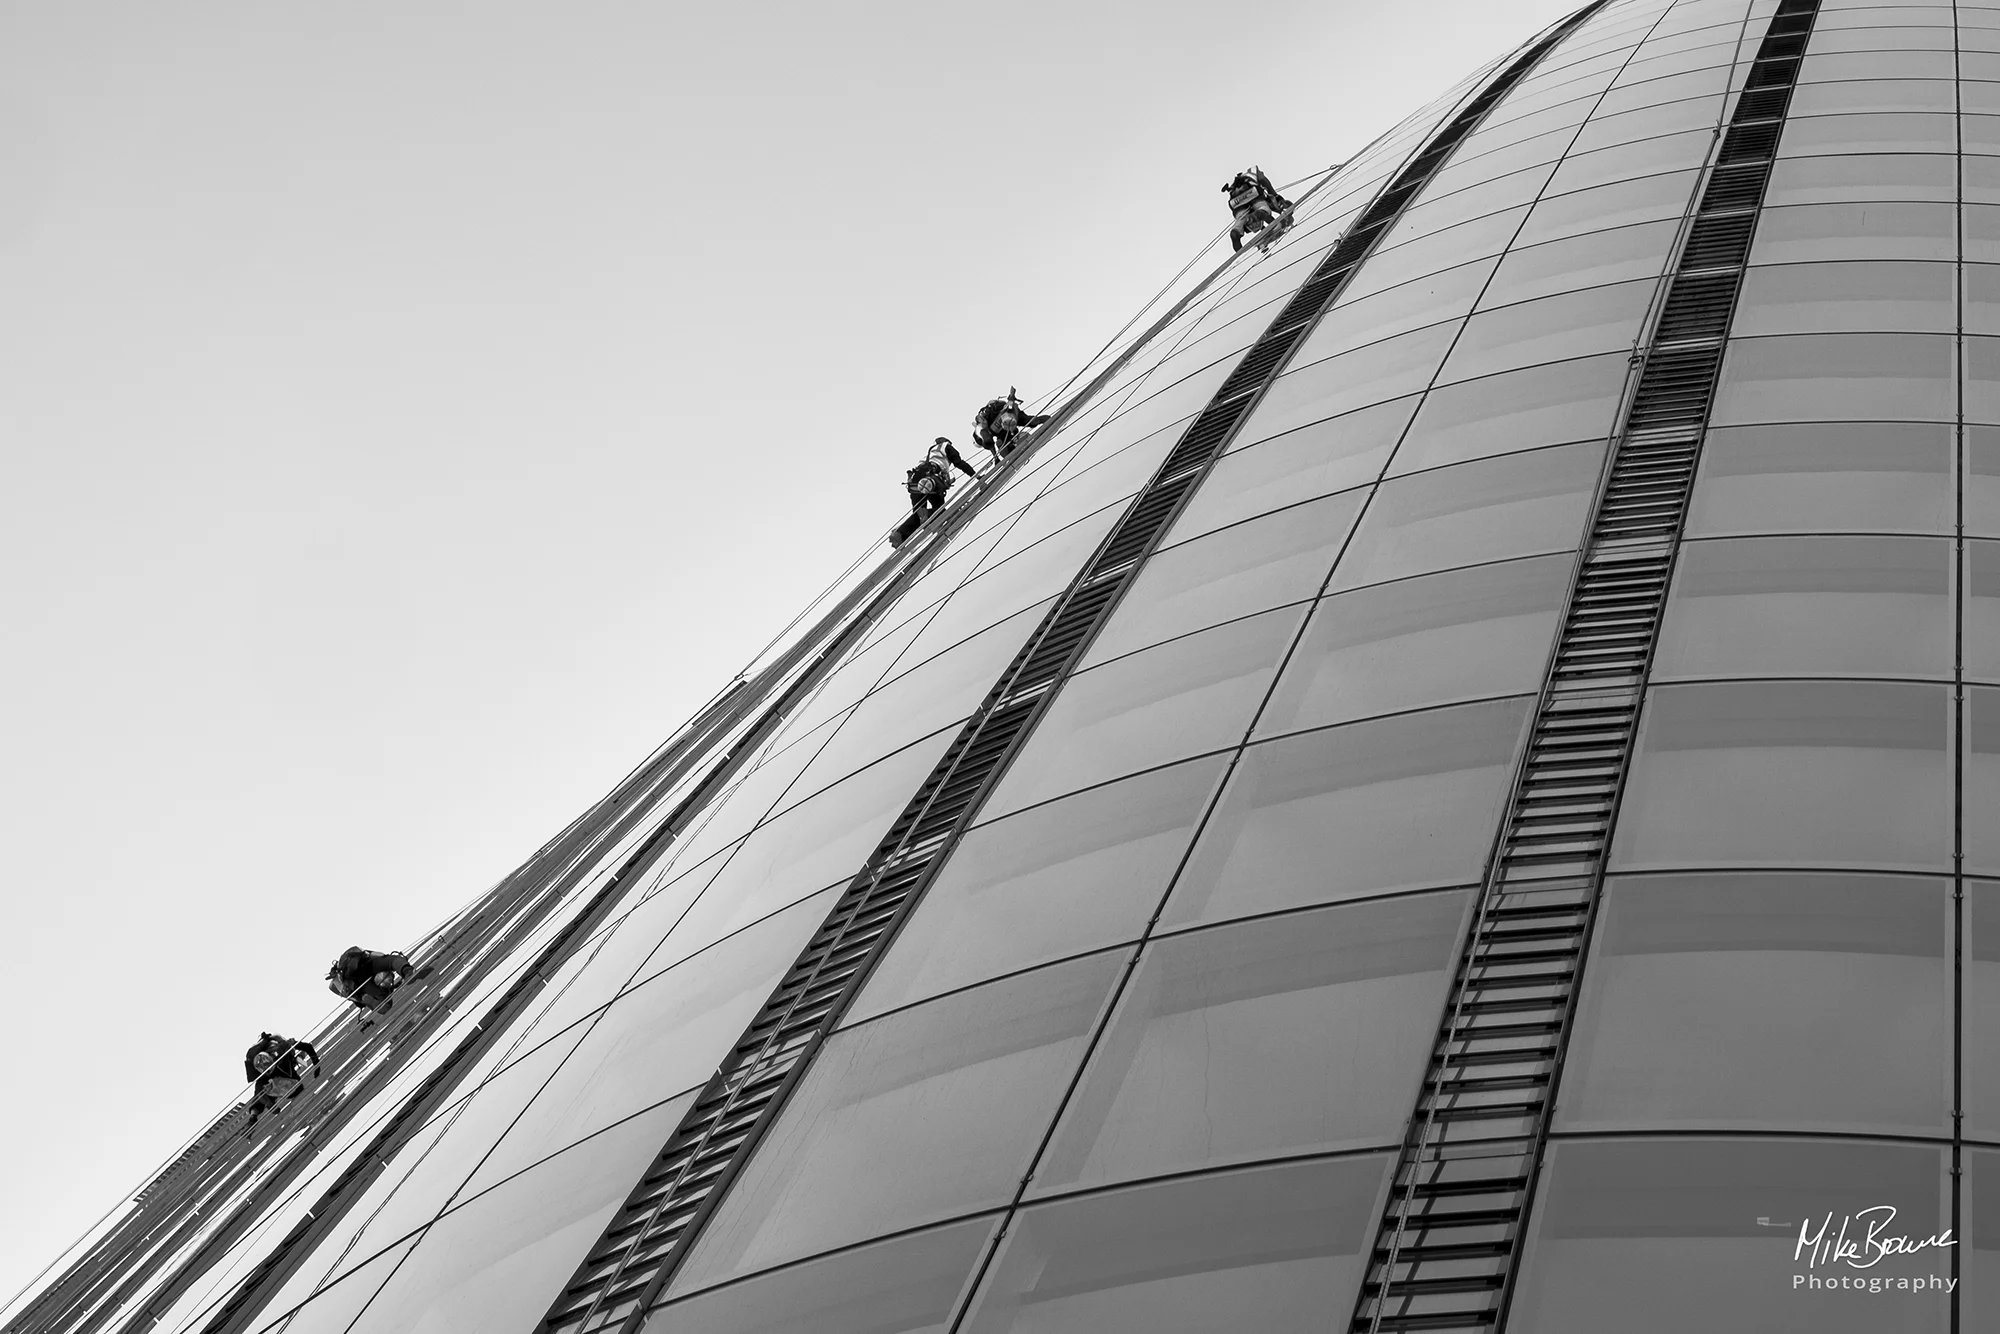 tint figures of workmen cleaning windows on a London skyscraper